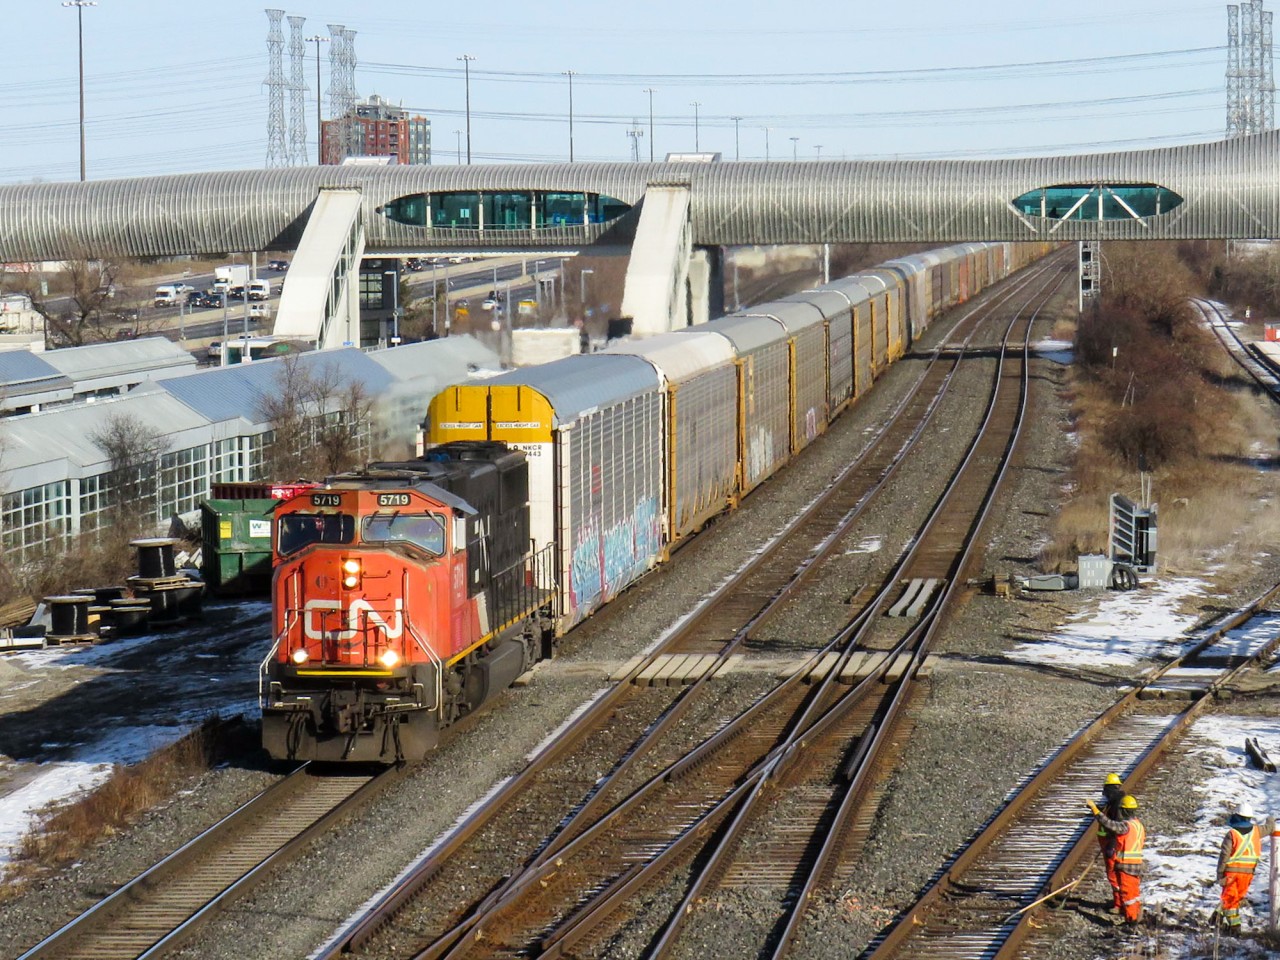 CN 271 starts its climb up the CN York sub with CN SD75I 5719 providing the sole power. With about 65 empty autoracks, 271 has no problems heading up the York sub towards Toronto and points west.